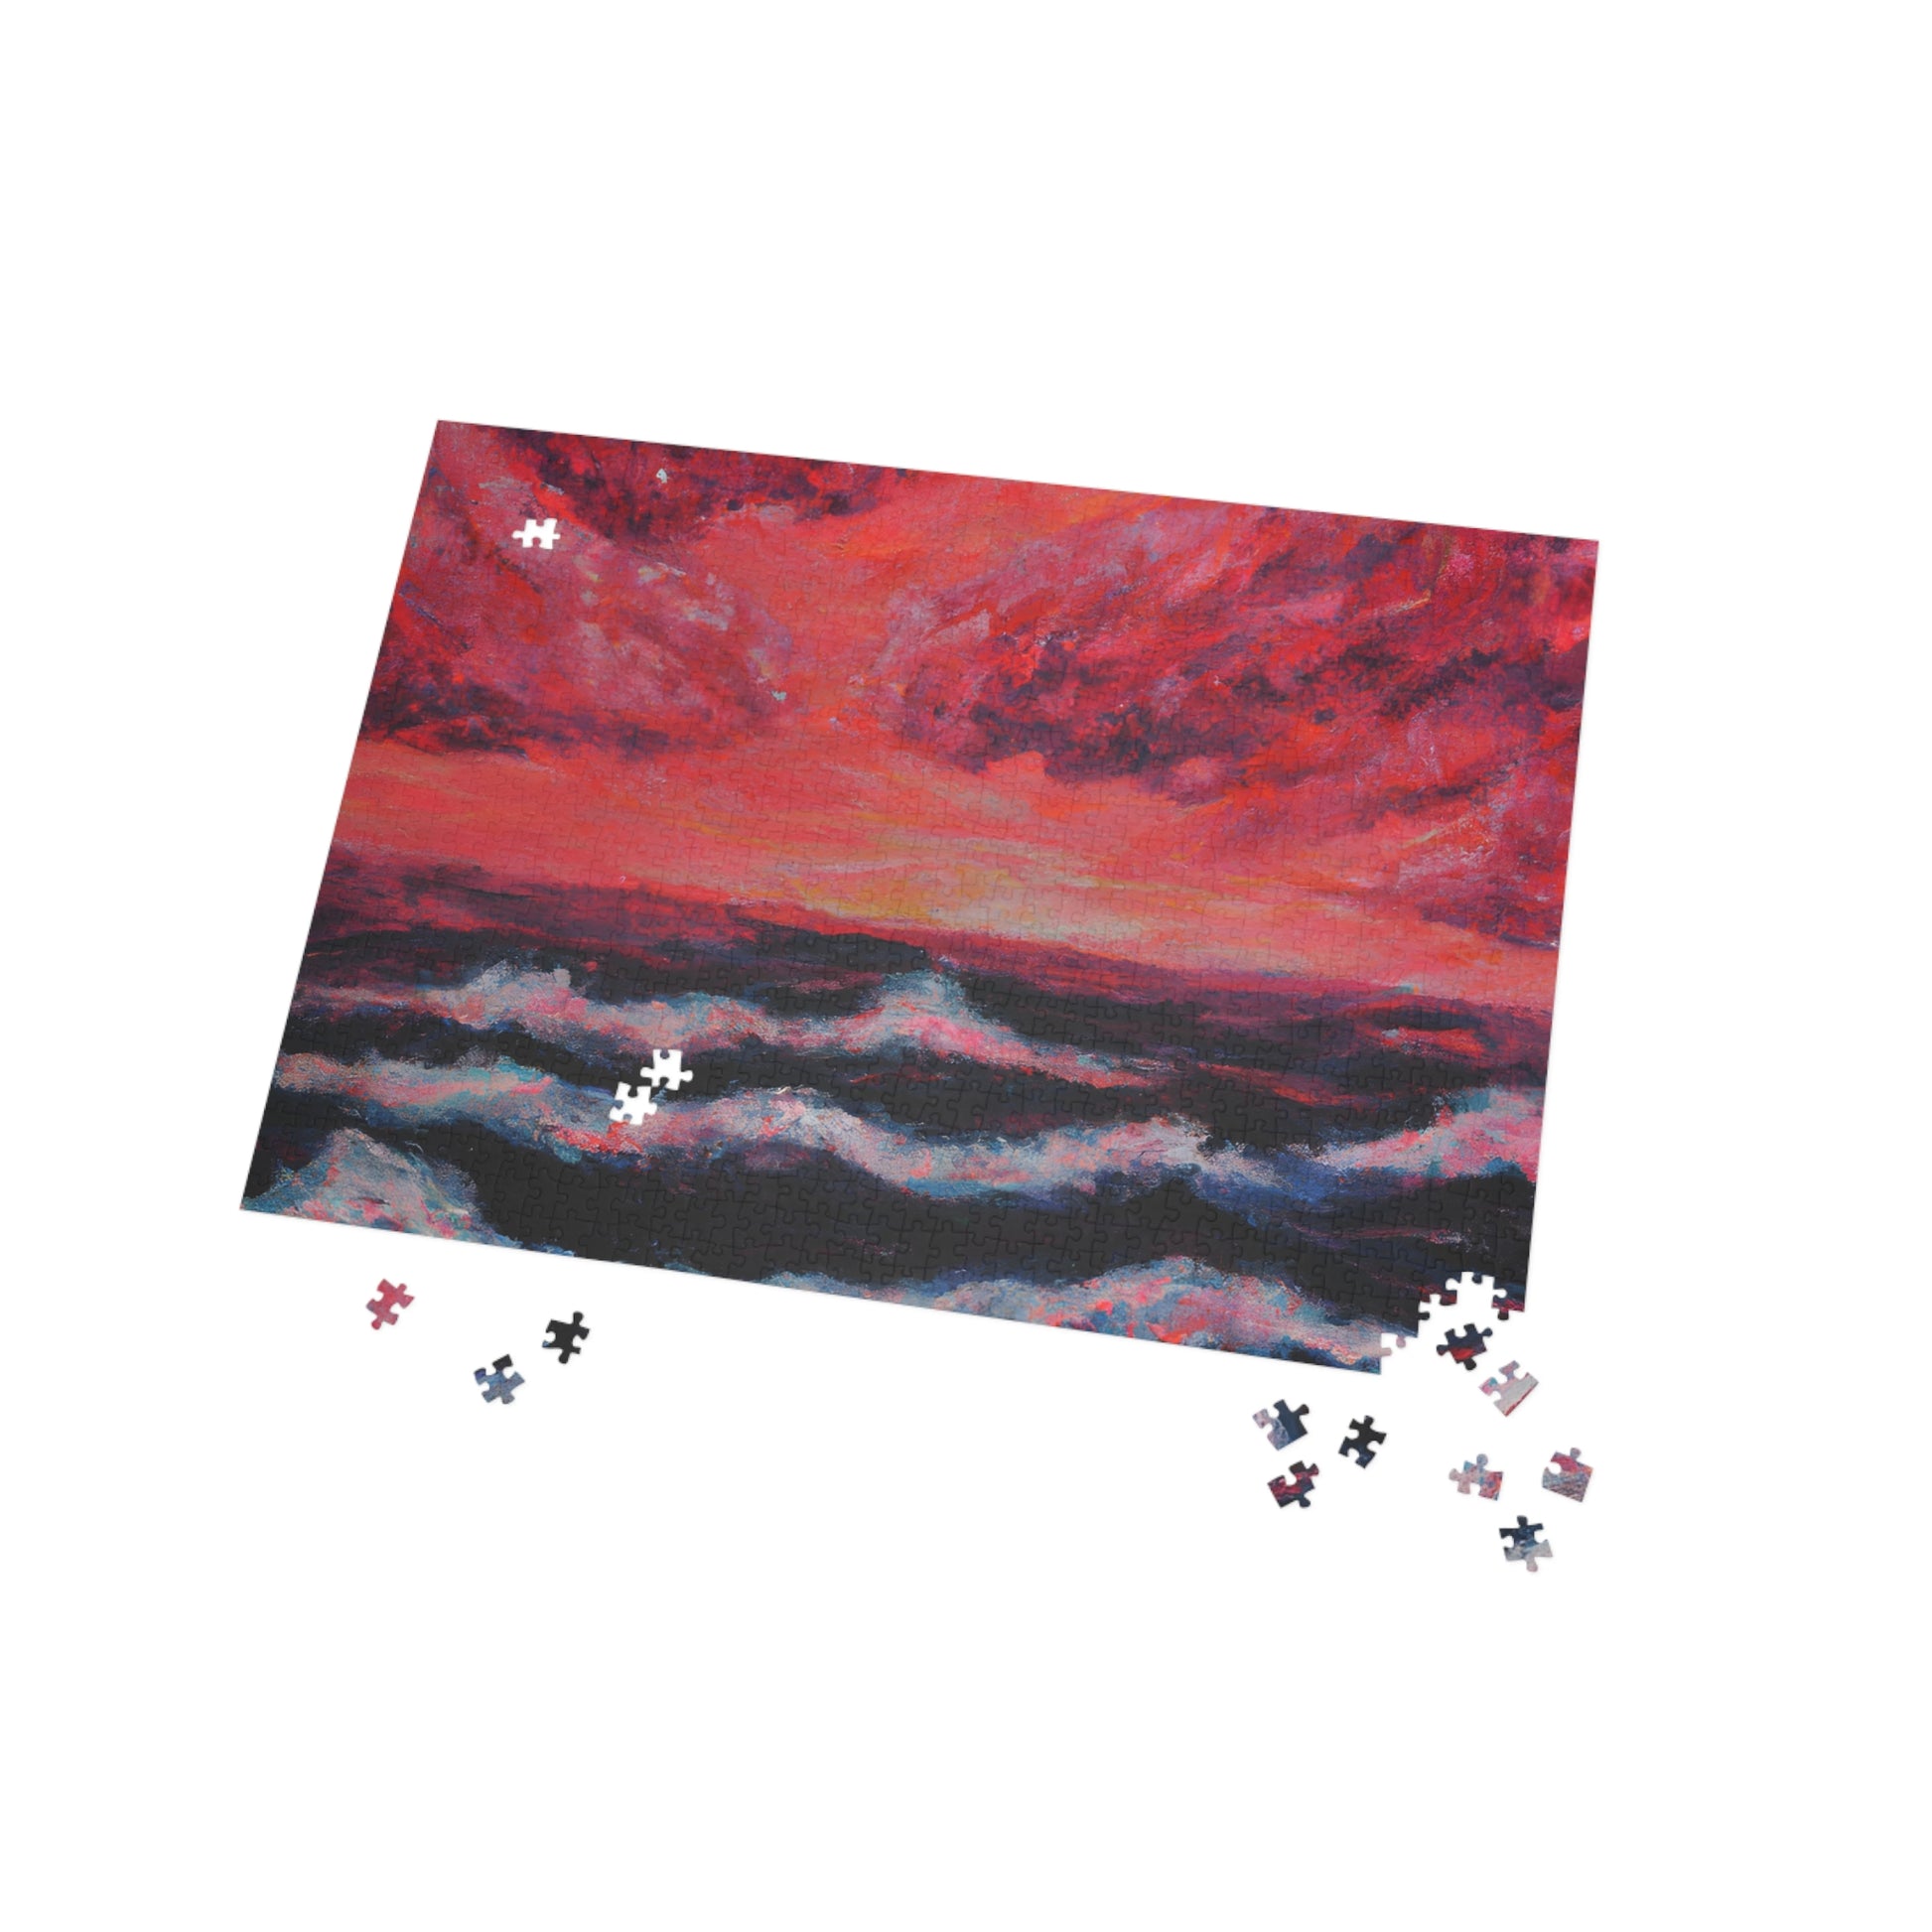 SoothingSpectrum Jigsaw Puzzle